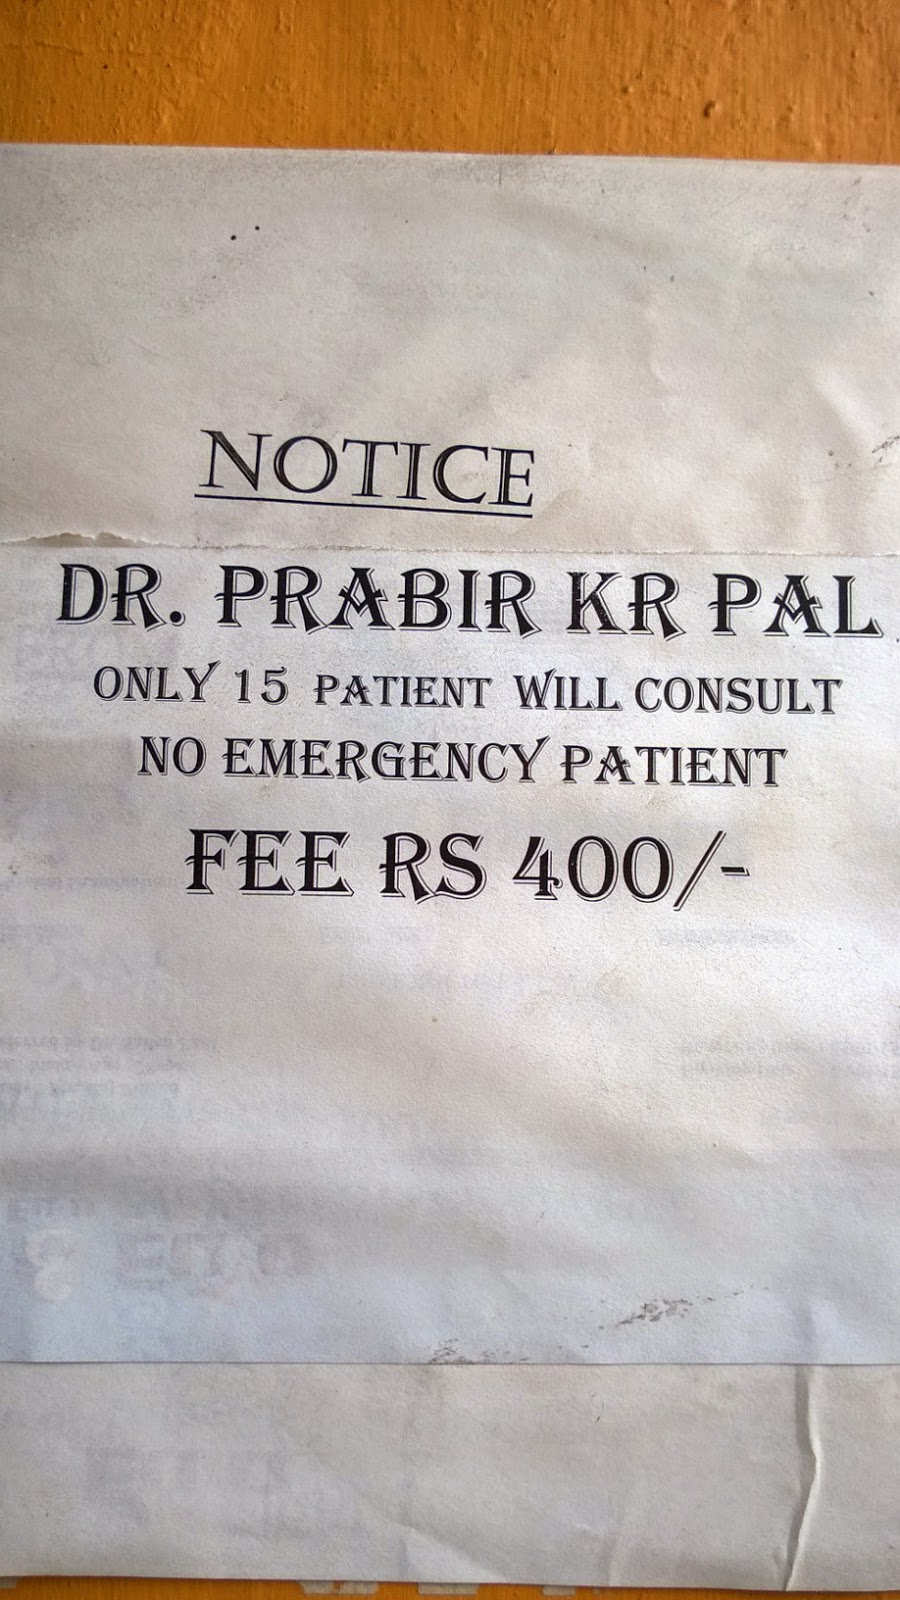 Is this expected from a professional doctor? - Dr. Prabir Kr. Pal - Euro Medical Services Private Limited in Howrah Maidan, near Vodafone and Raymond showroom